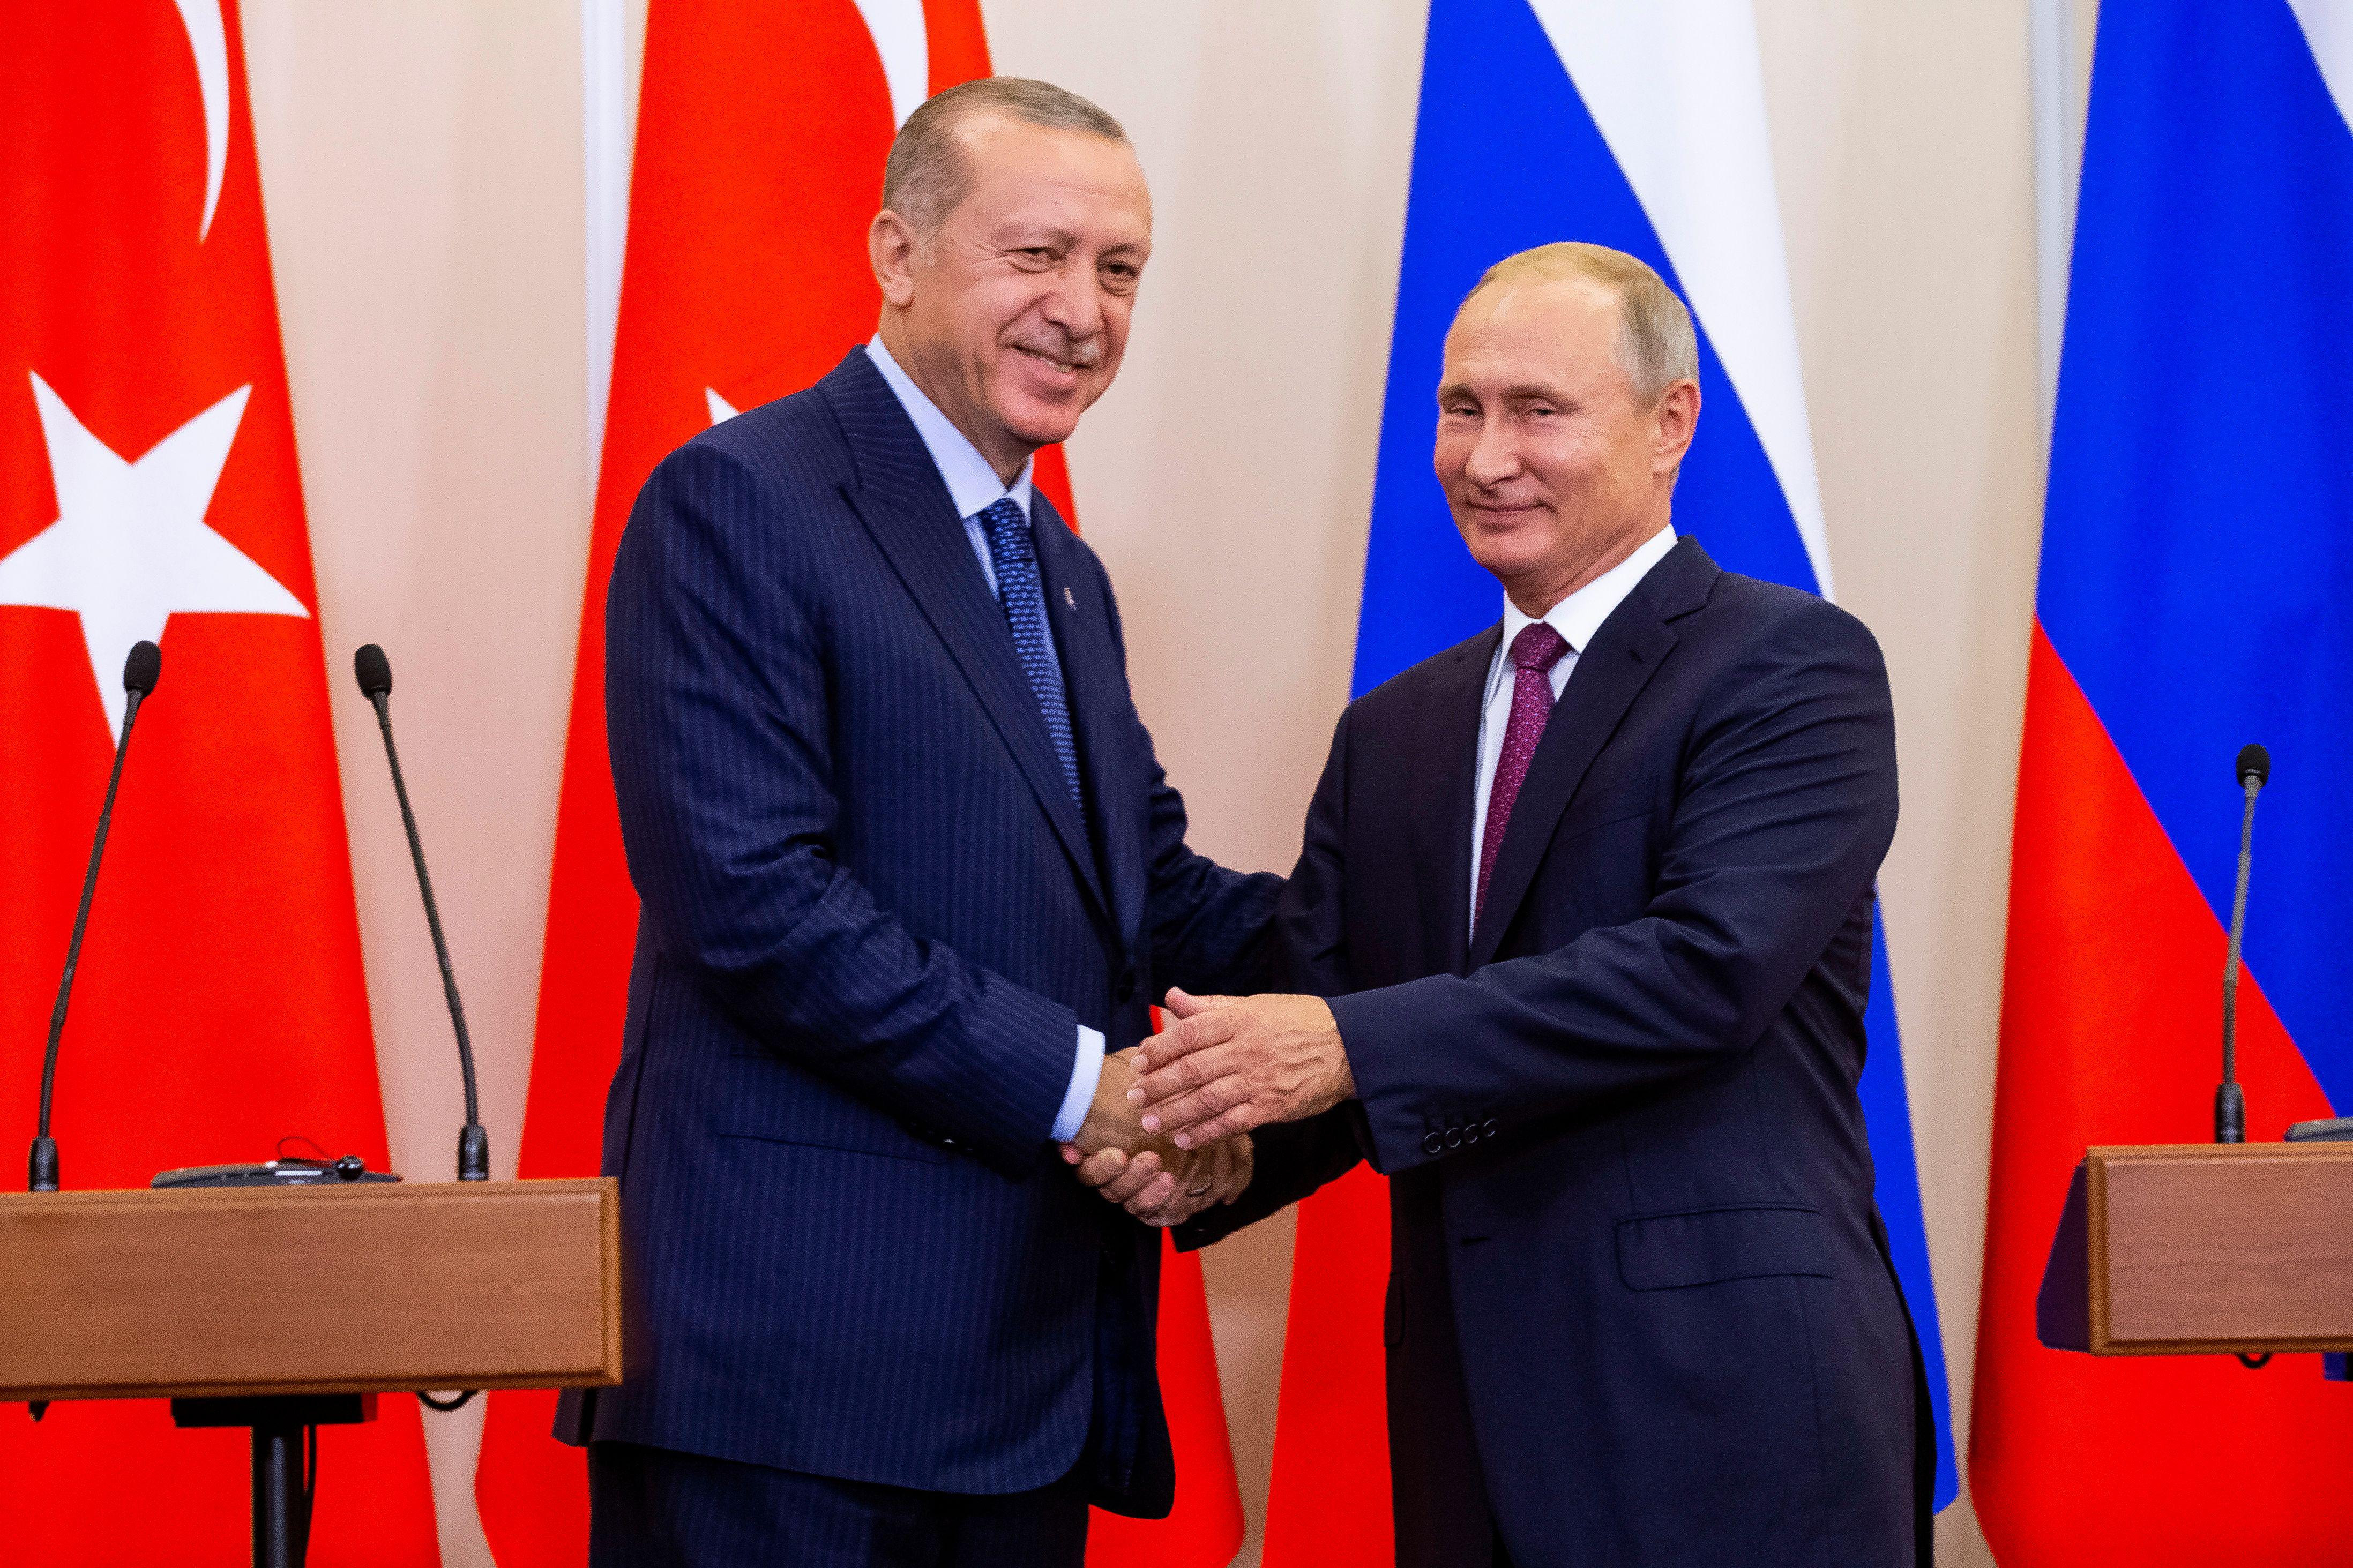 Russian President Vladimir Putin shakes hands with Turkish President Recep Tayyip Erdogan after their joint press conference following the talks, in the Bocharov Ruchei residence in the Black Sea resort of Sochi in Sochi on September 17, 2018.